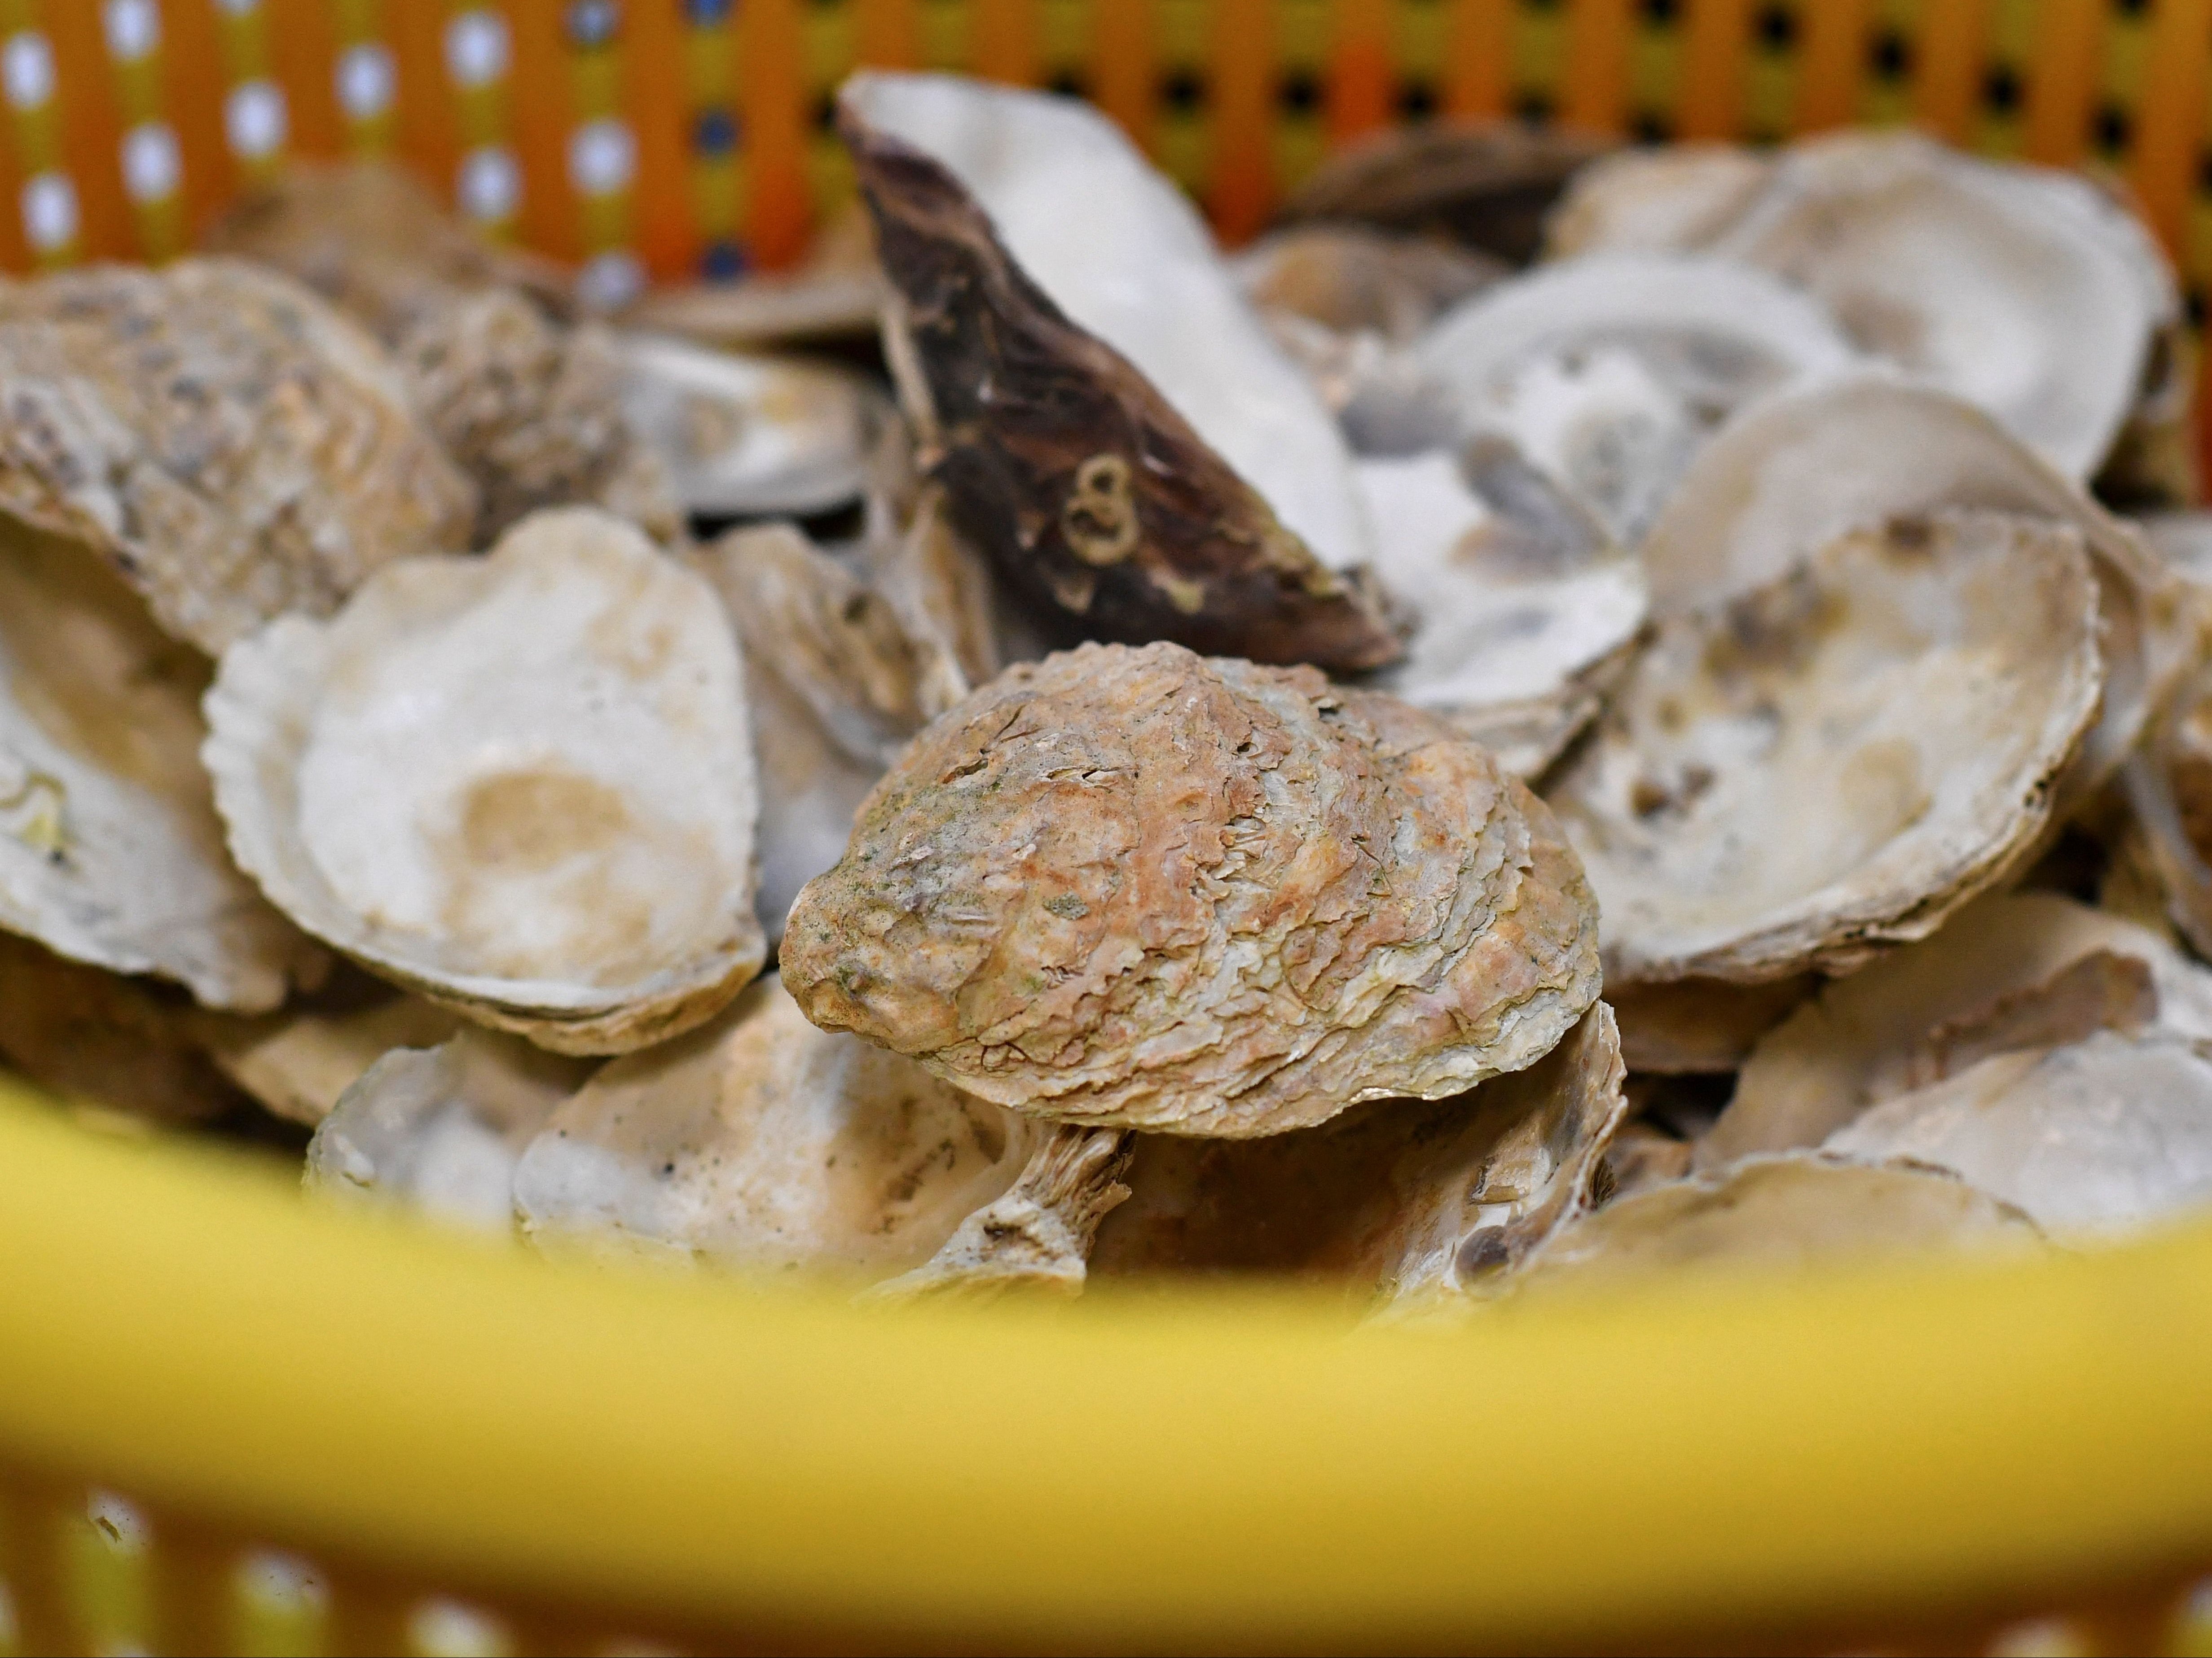 An investigation has been launched and an Oyster farm closed due to at least 100 cases of people falling il